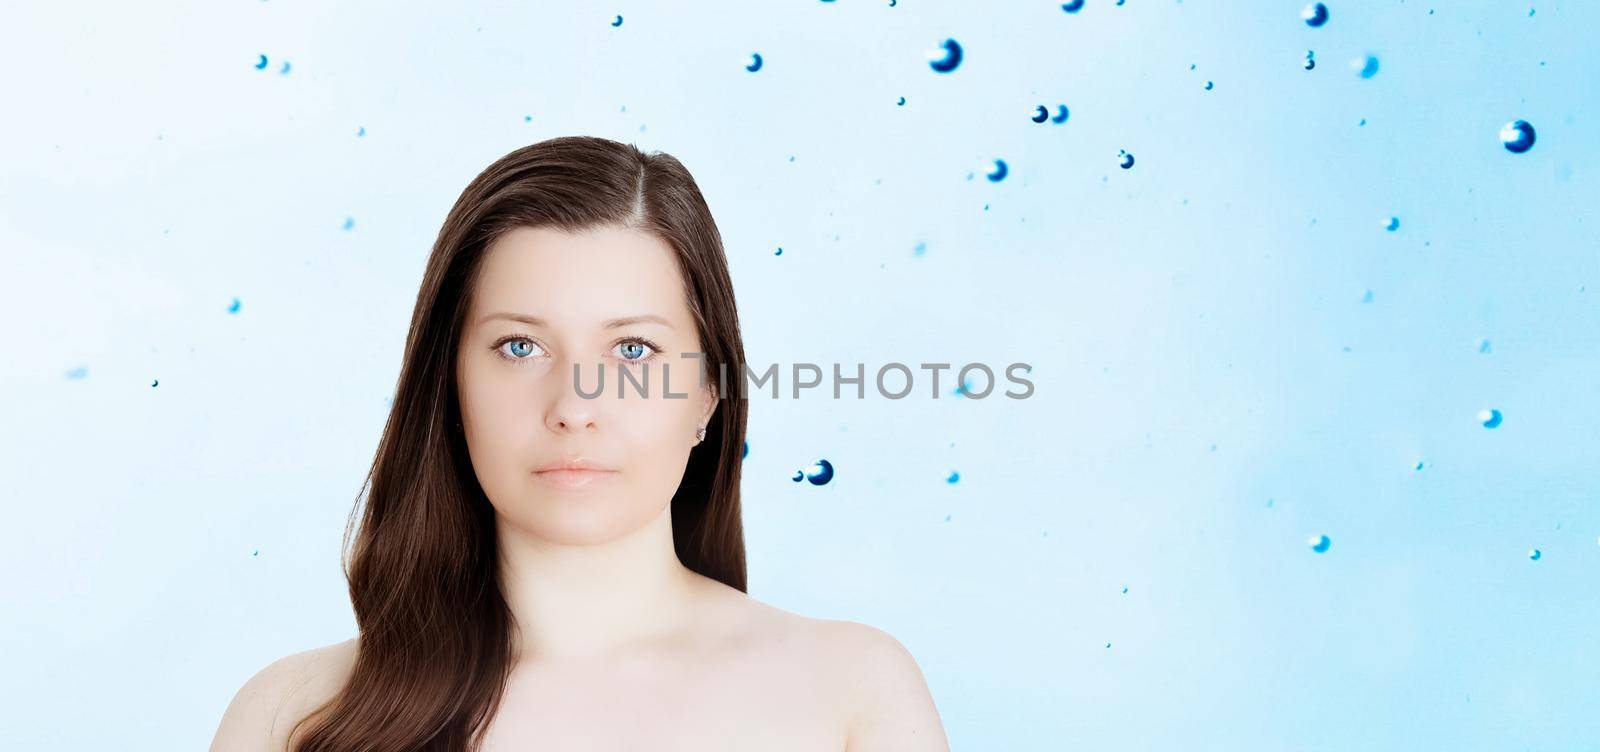 Rejuvenation skincare and beauty ad, beauty face portrait of young woman with healthy clean skin, blue cosmetic liquid drops on background.